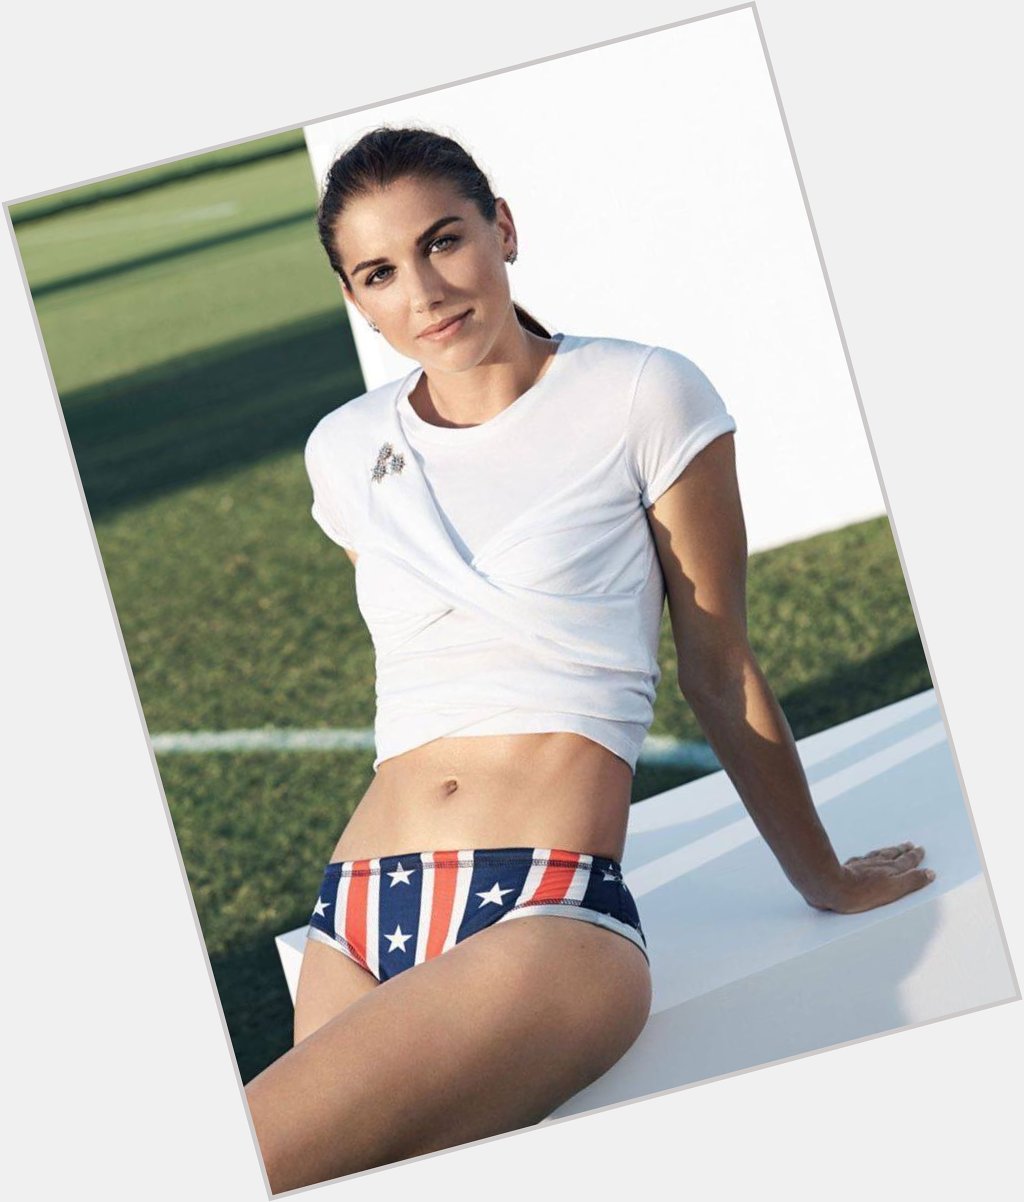 Happy Birthday to soccer player Alex Morgan who turns 30 today! 